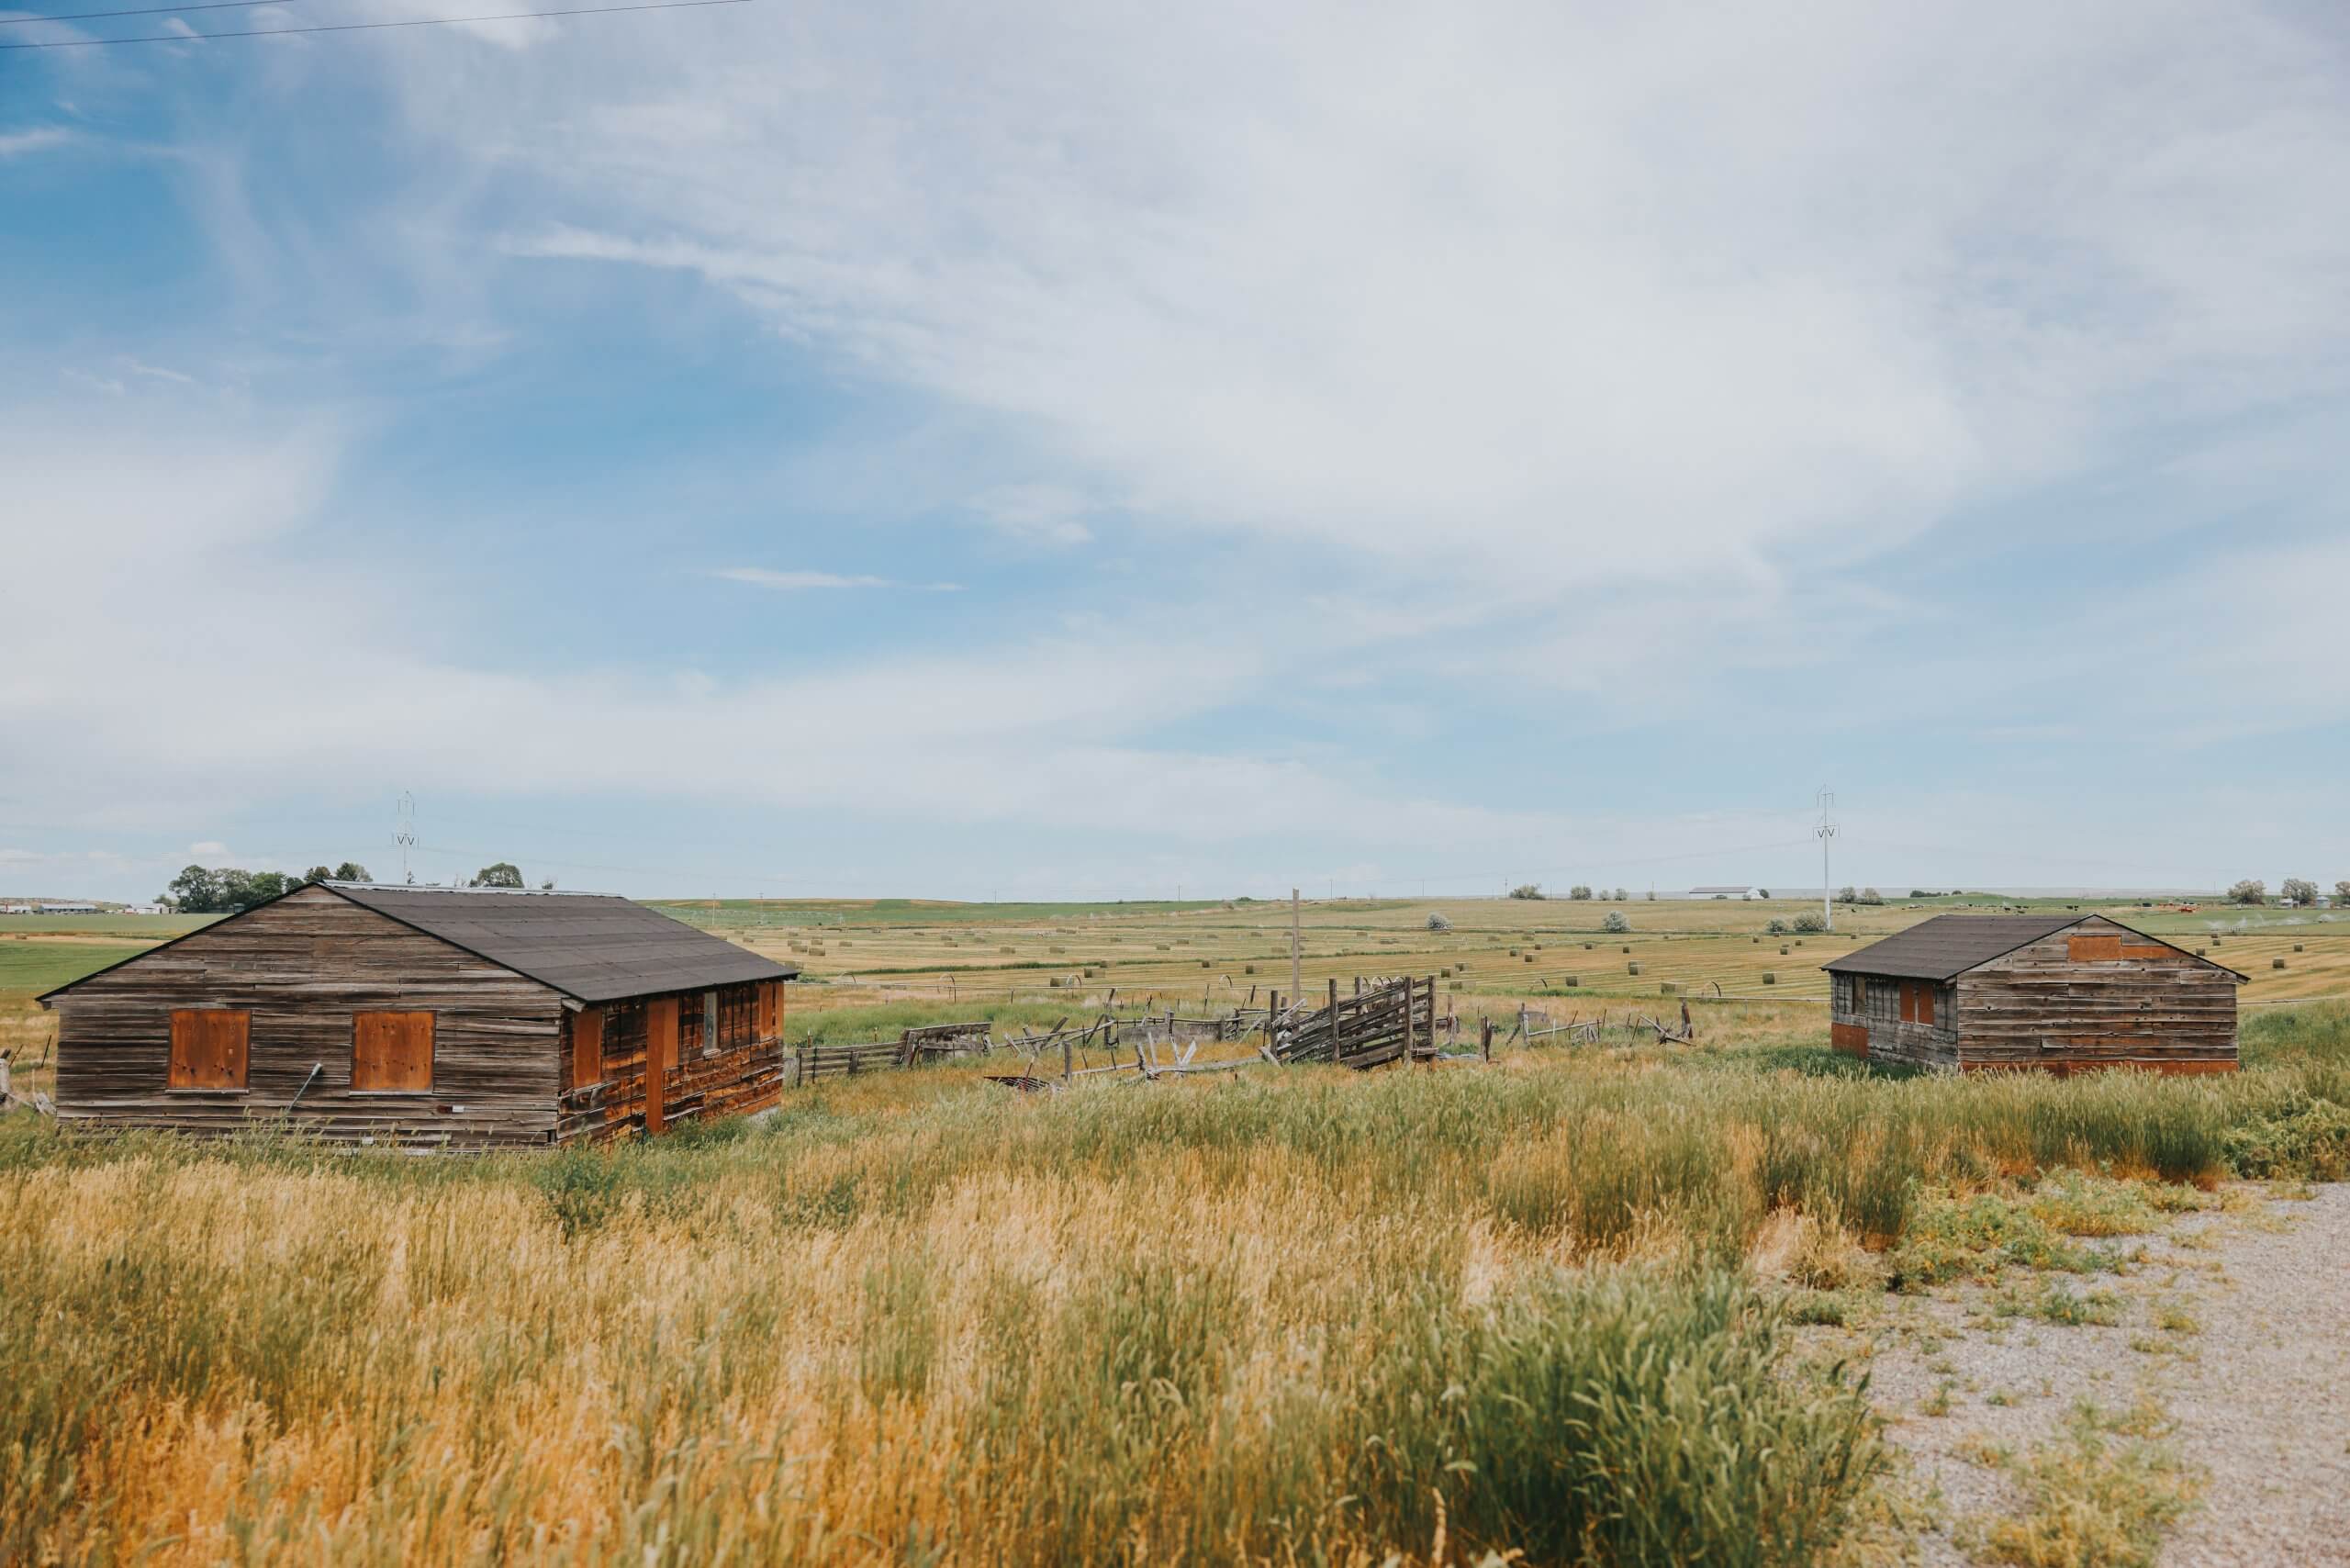 Historic buildings found at the Minidoka Historic Site in the fall.